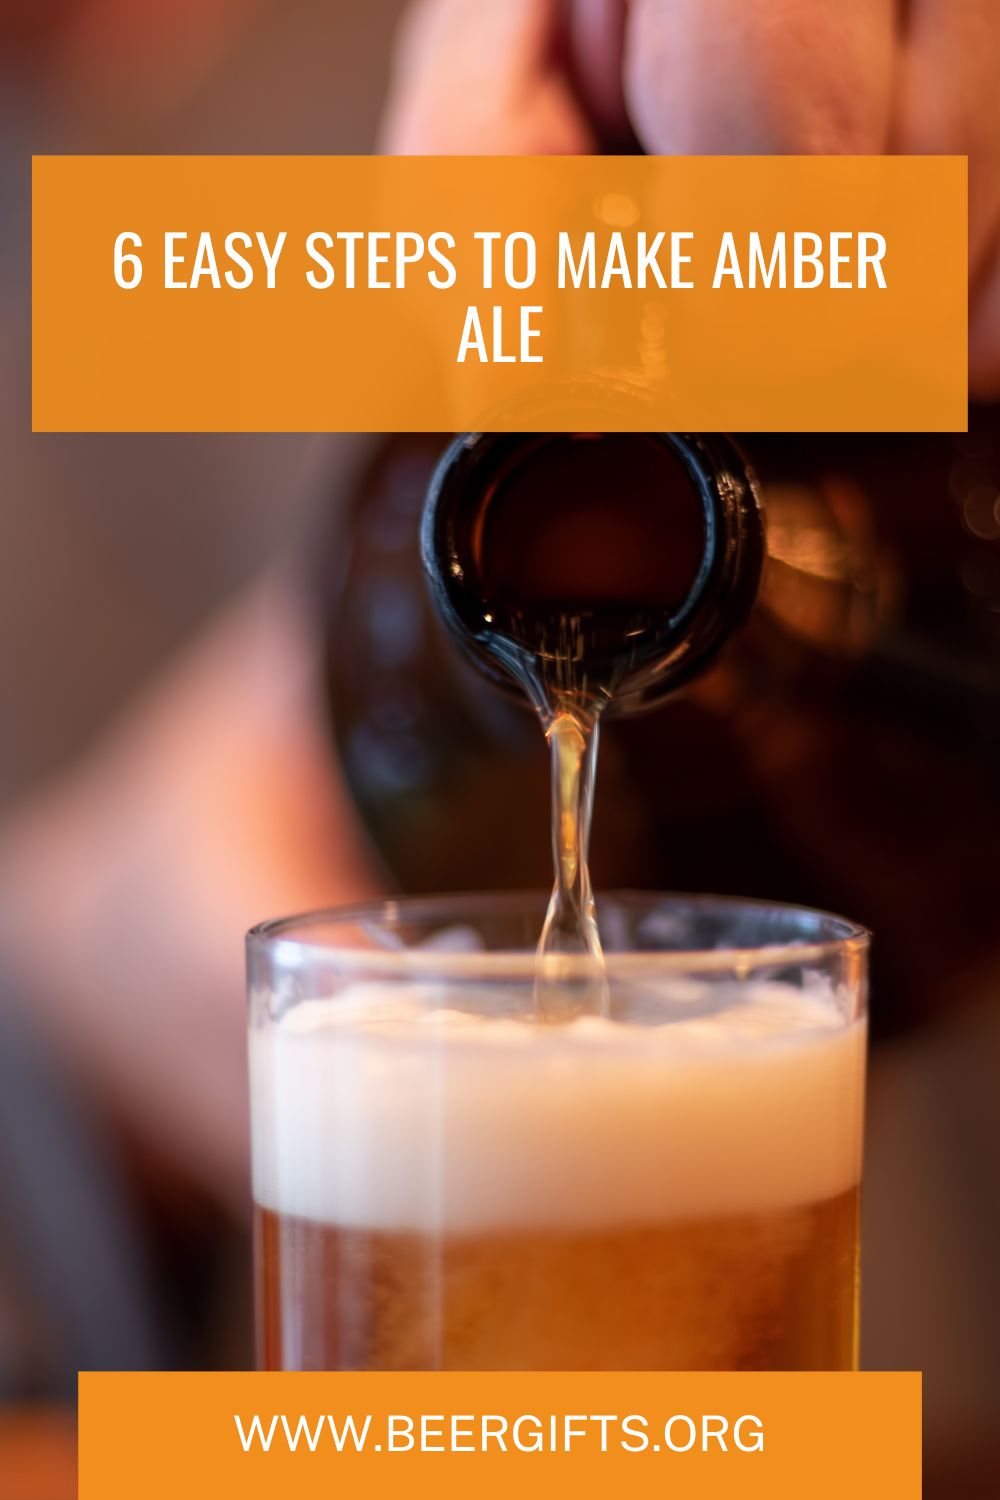 6 Easy Steps to Make Amber Ale9